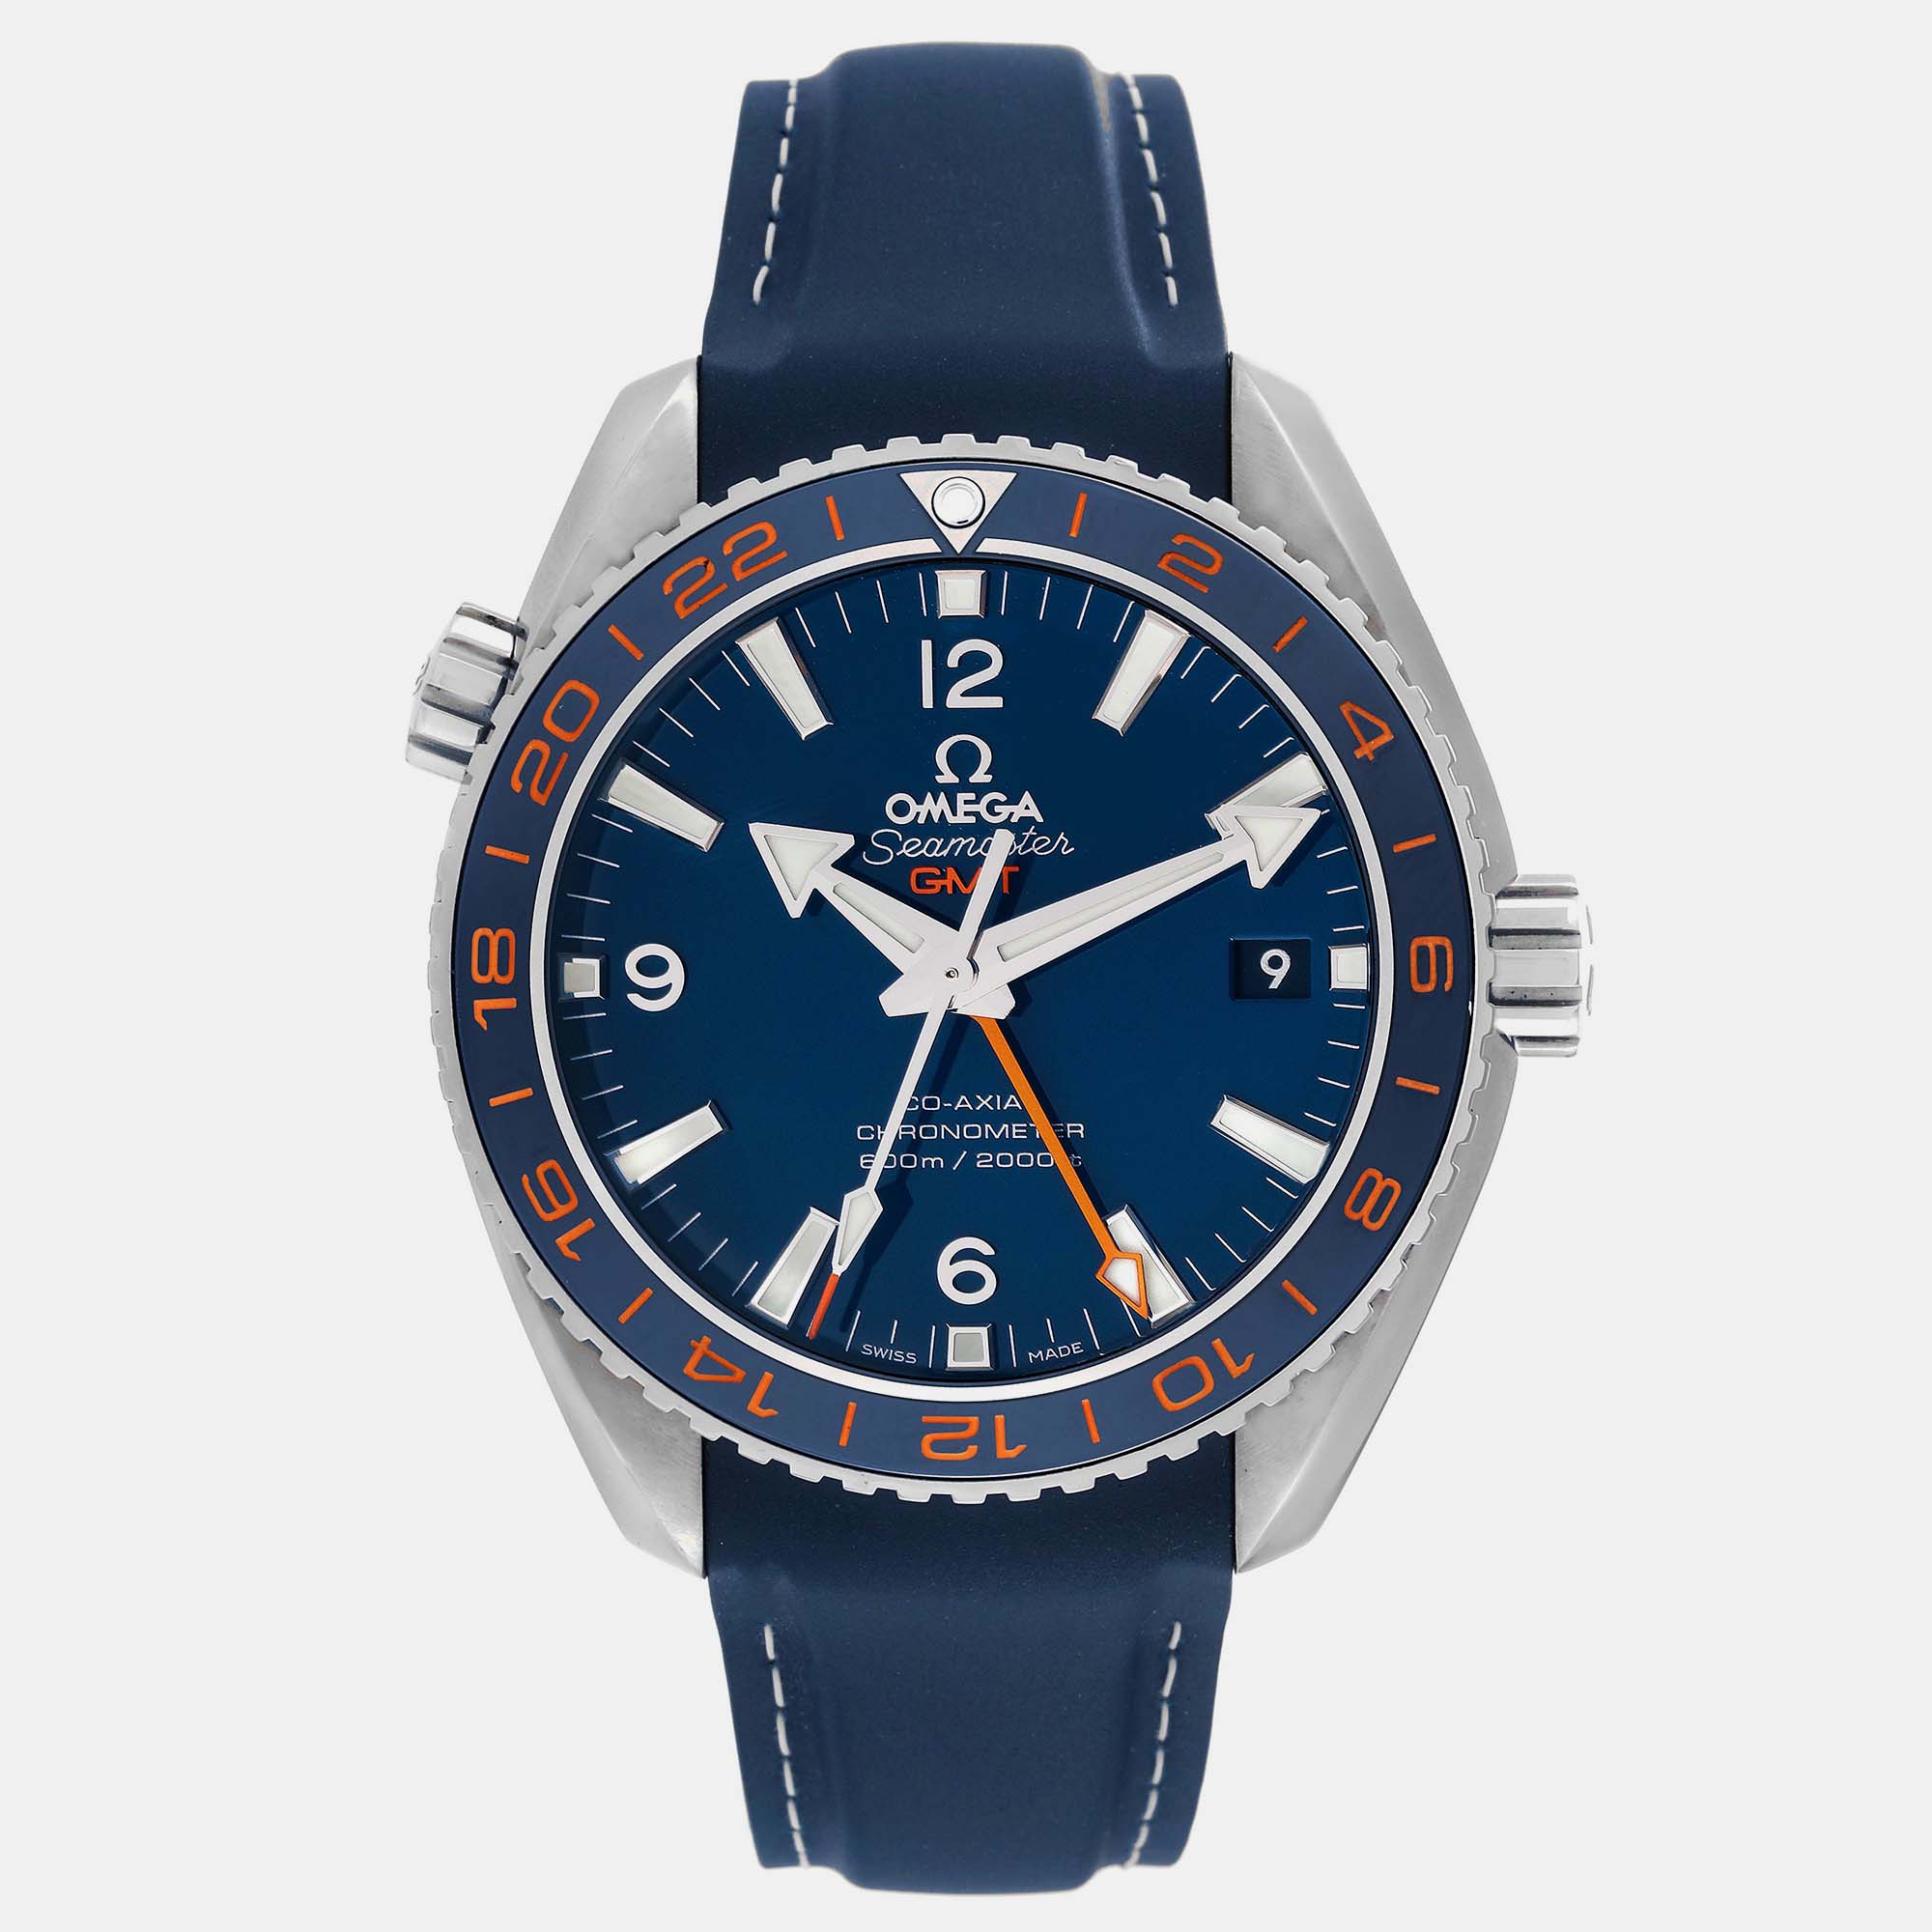 Omega blue ceramic stainless steel seamaster planet ocean automatic men's wristwatch 44 mm